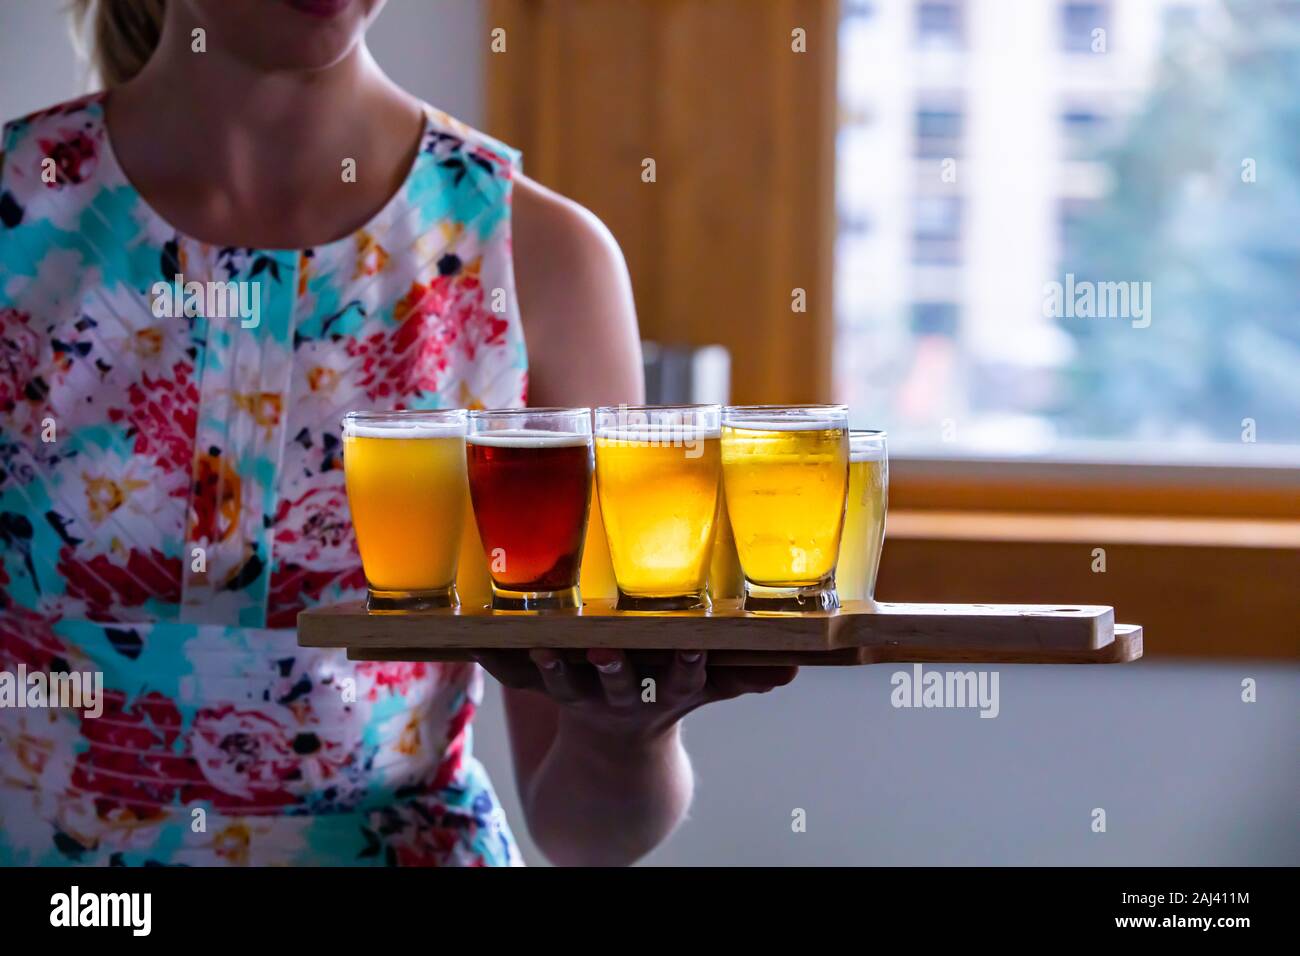 selective focus on Flight of Craft four of different Beers glasses on Wooden two Tray, a caucasian woman serving holding the trays in the background Stock Photo